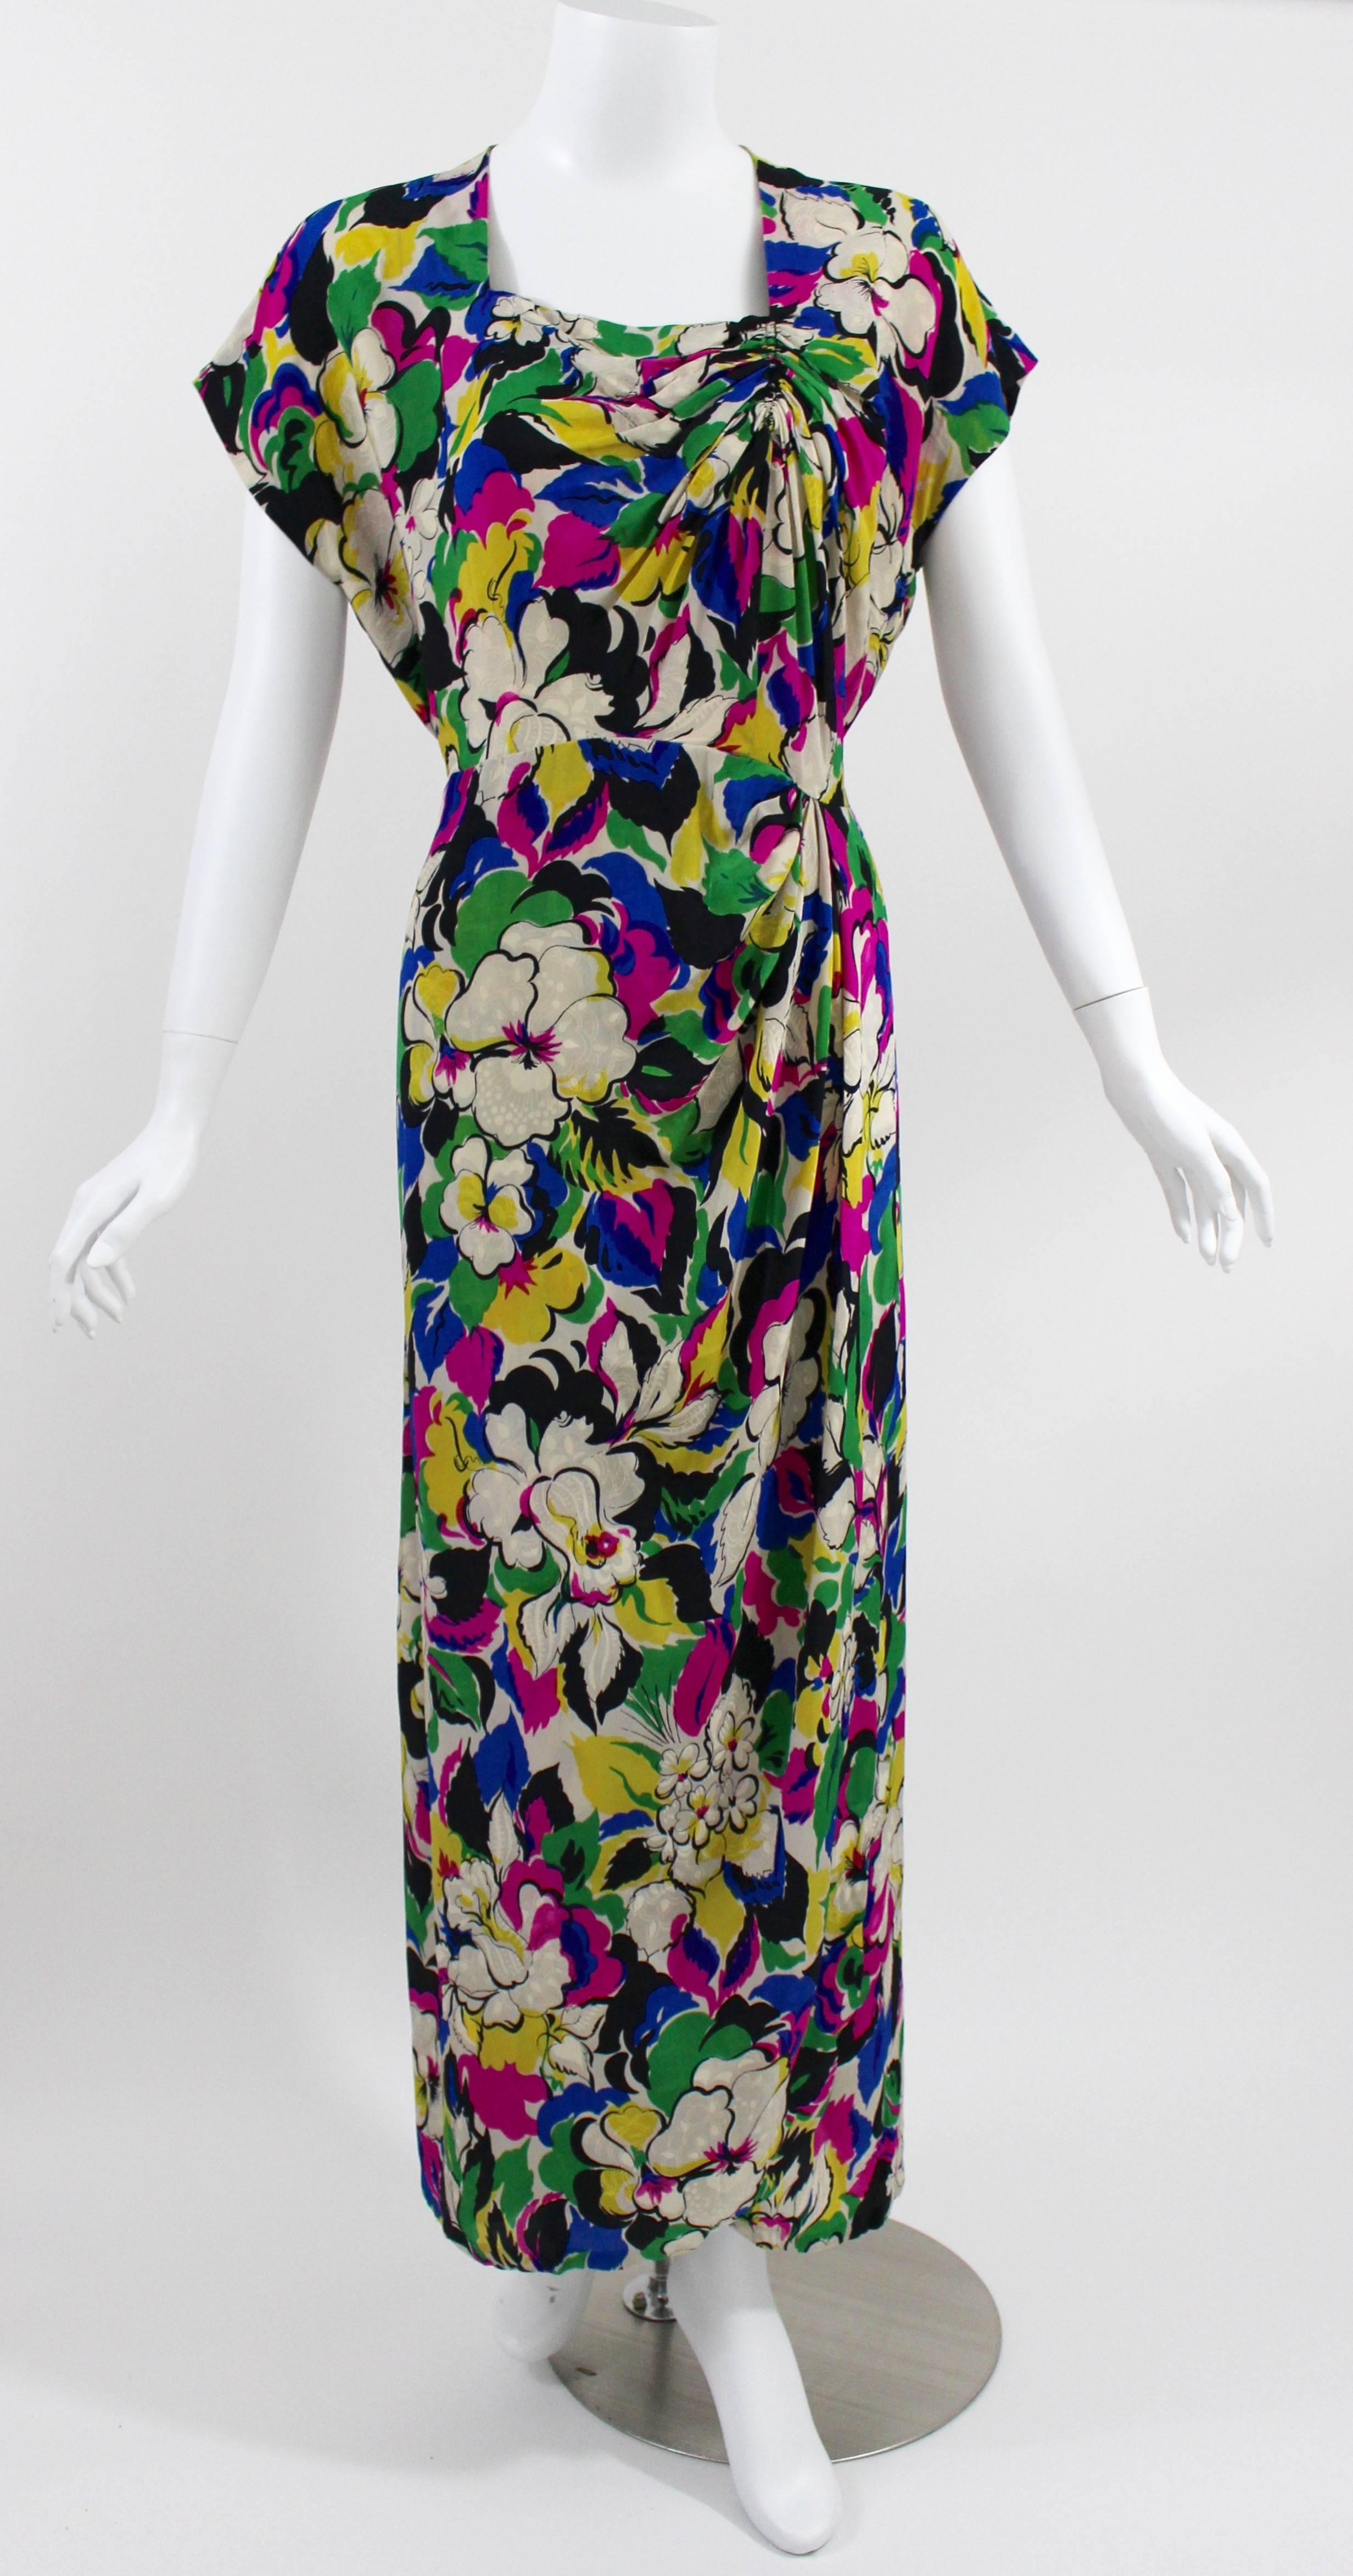 A beautiful 1940s colorful floral garden dress. The dress is fashioned in a light and drapey silk damask with a bright floral print in blue, fuchsia, green, yellow, ivory and black. With short sleeves , a square cut neckline and a hint of ruched